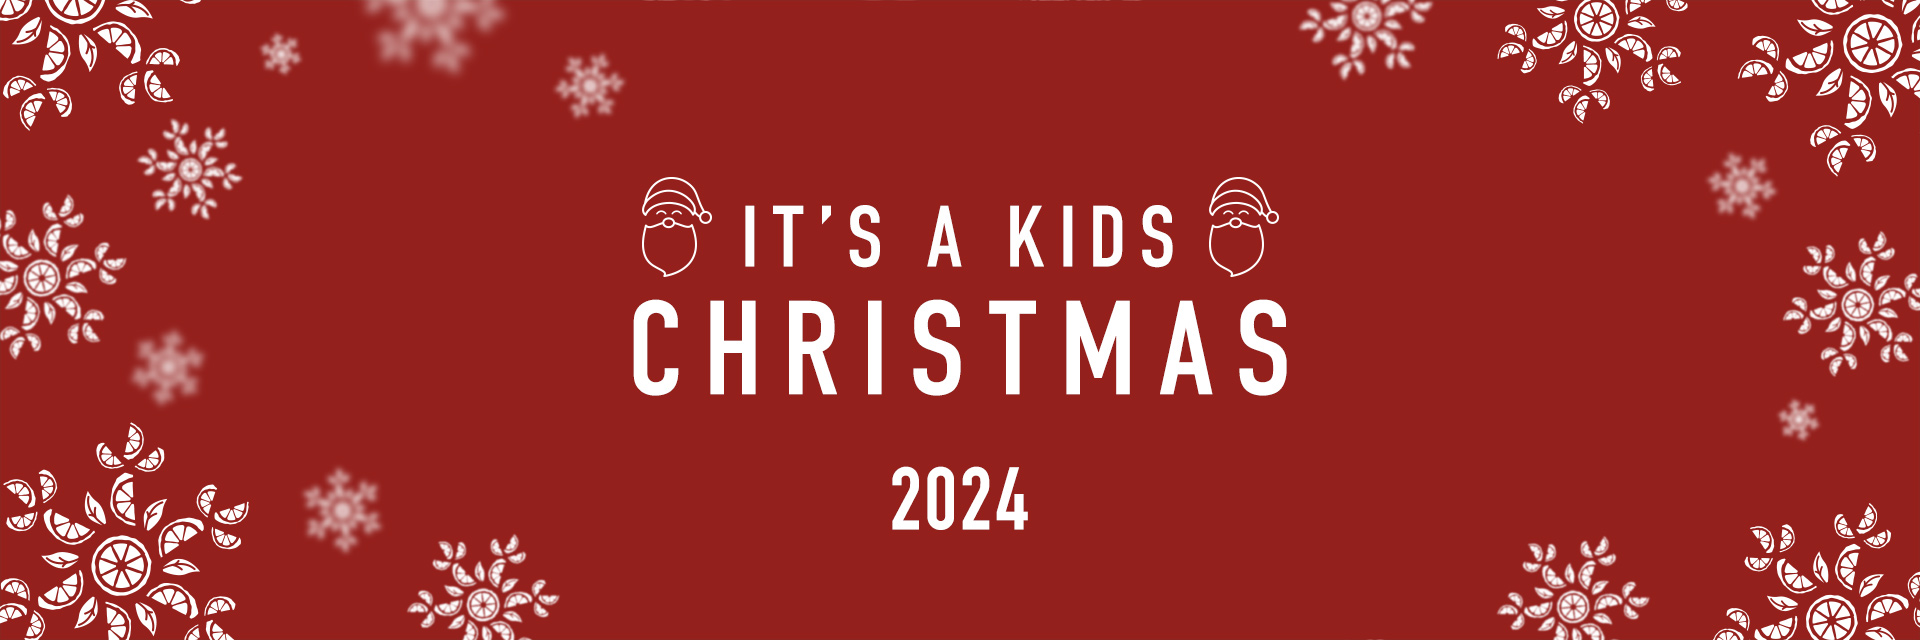 Kids Christmas Menu 2024 at The Mandeville Arms